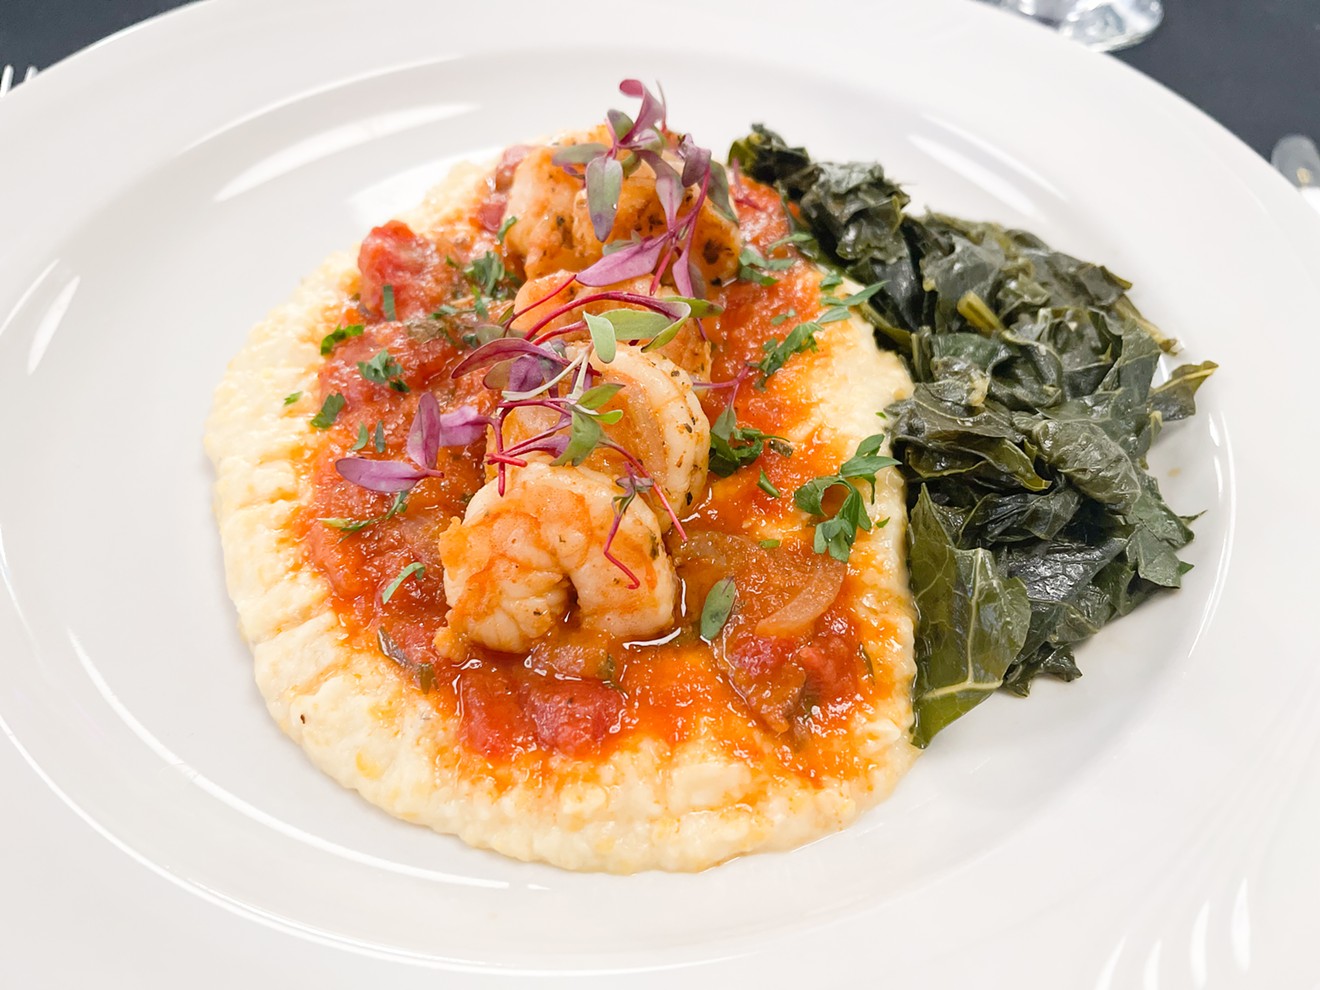 A typical meal that includes shrimp and grits served with a light tomato sauce and a side of braised collard greens.